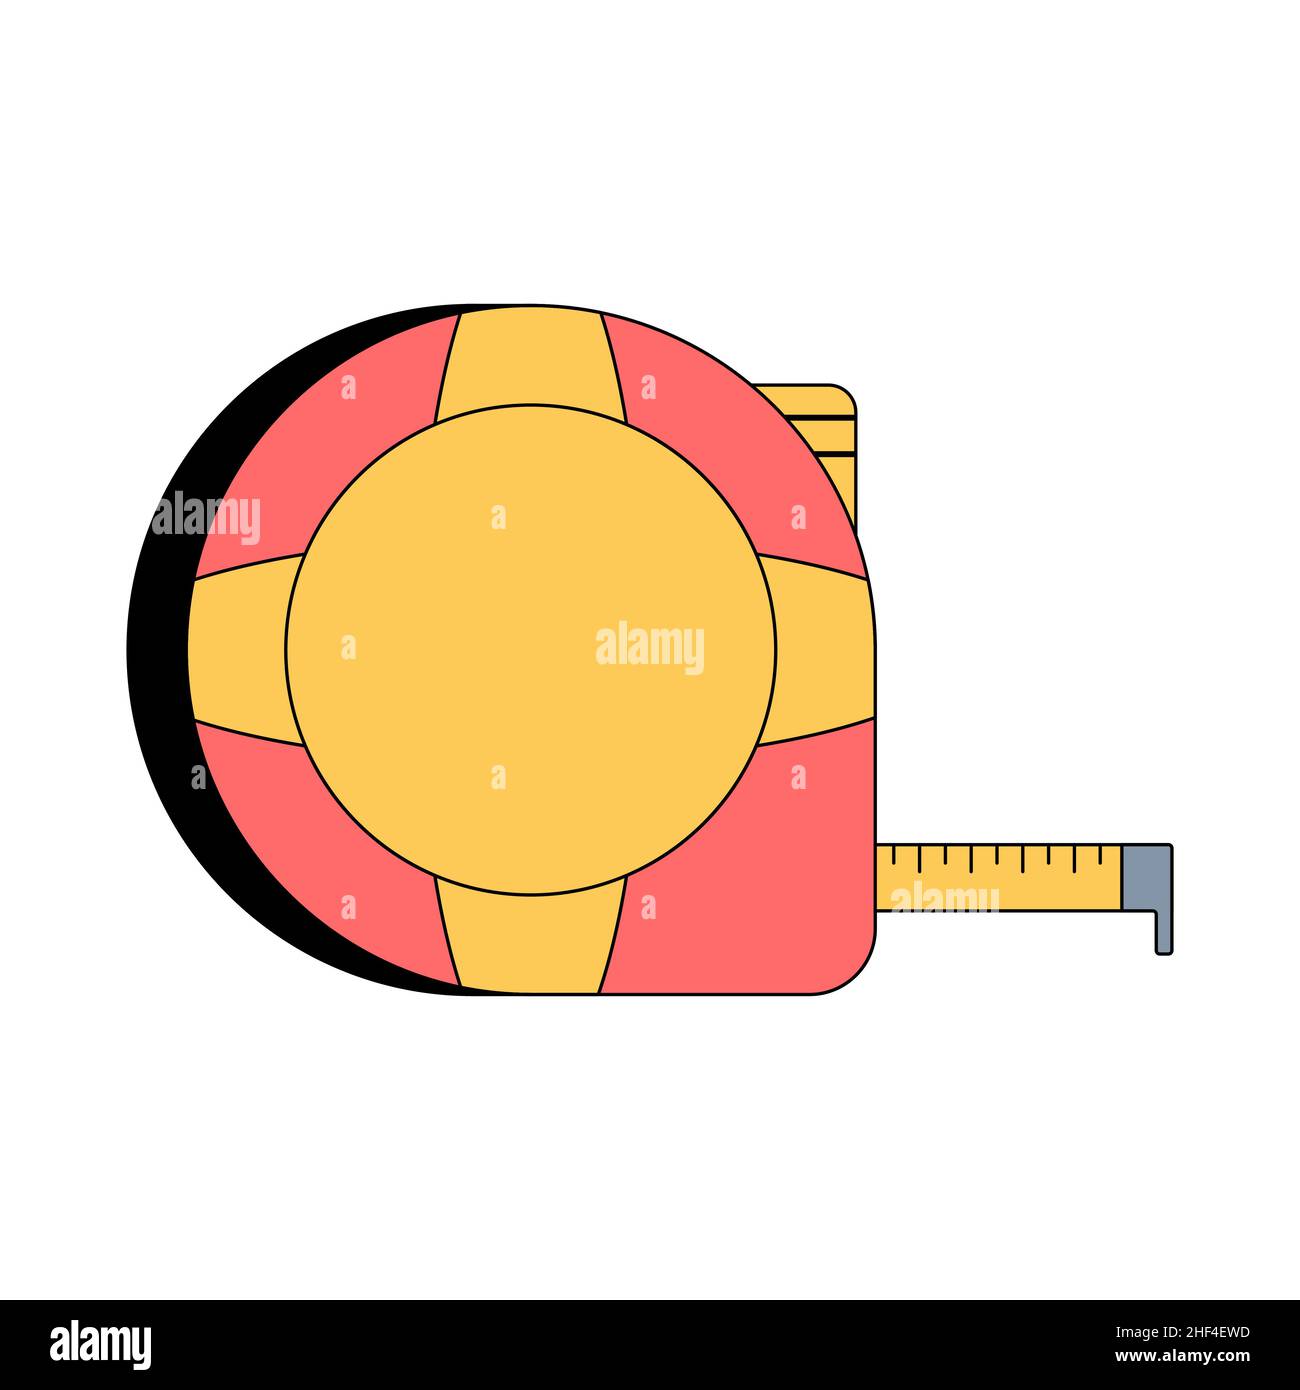 https://c8.alamy.com/comp/2HF4EWD/tape-measure-home-tailor-building-tool-roulette-construction-vector-illustration-in-flat-style-on-white-isolated-background-icon-2HF4EWD.jpg